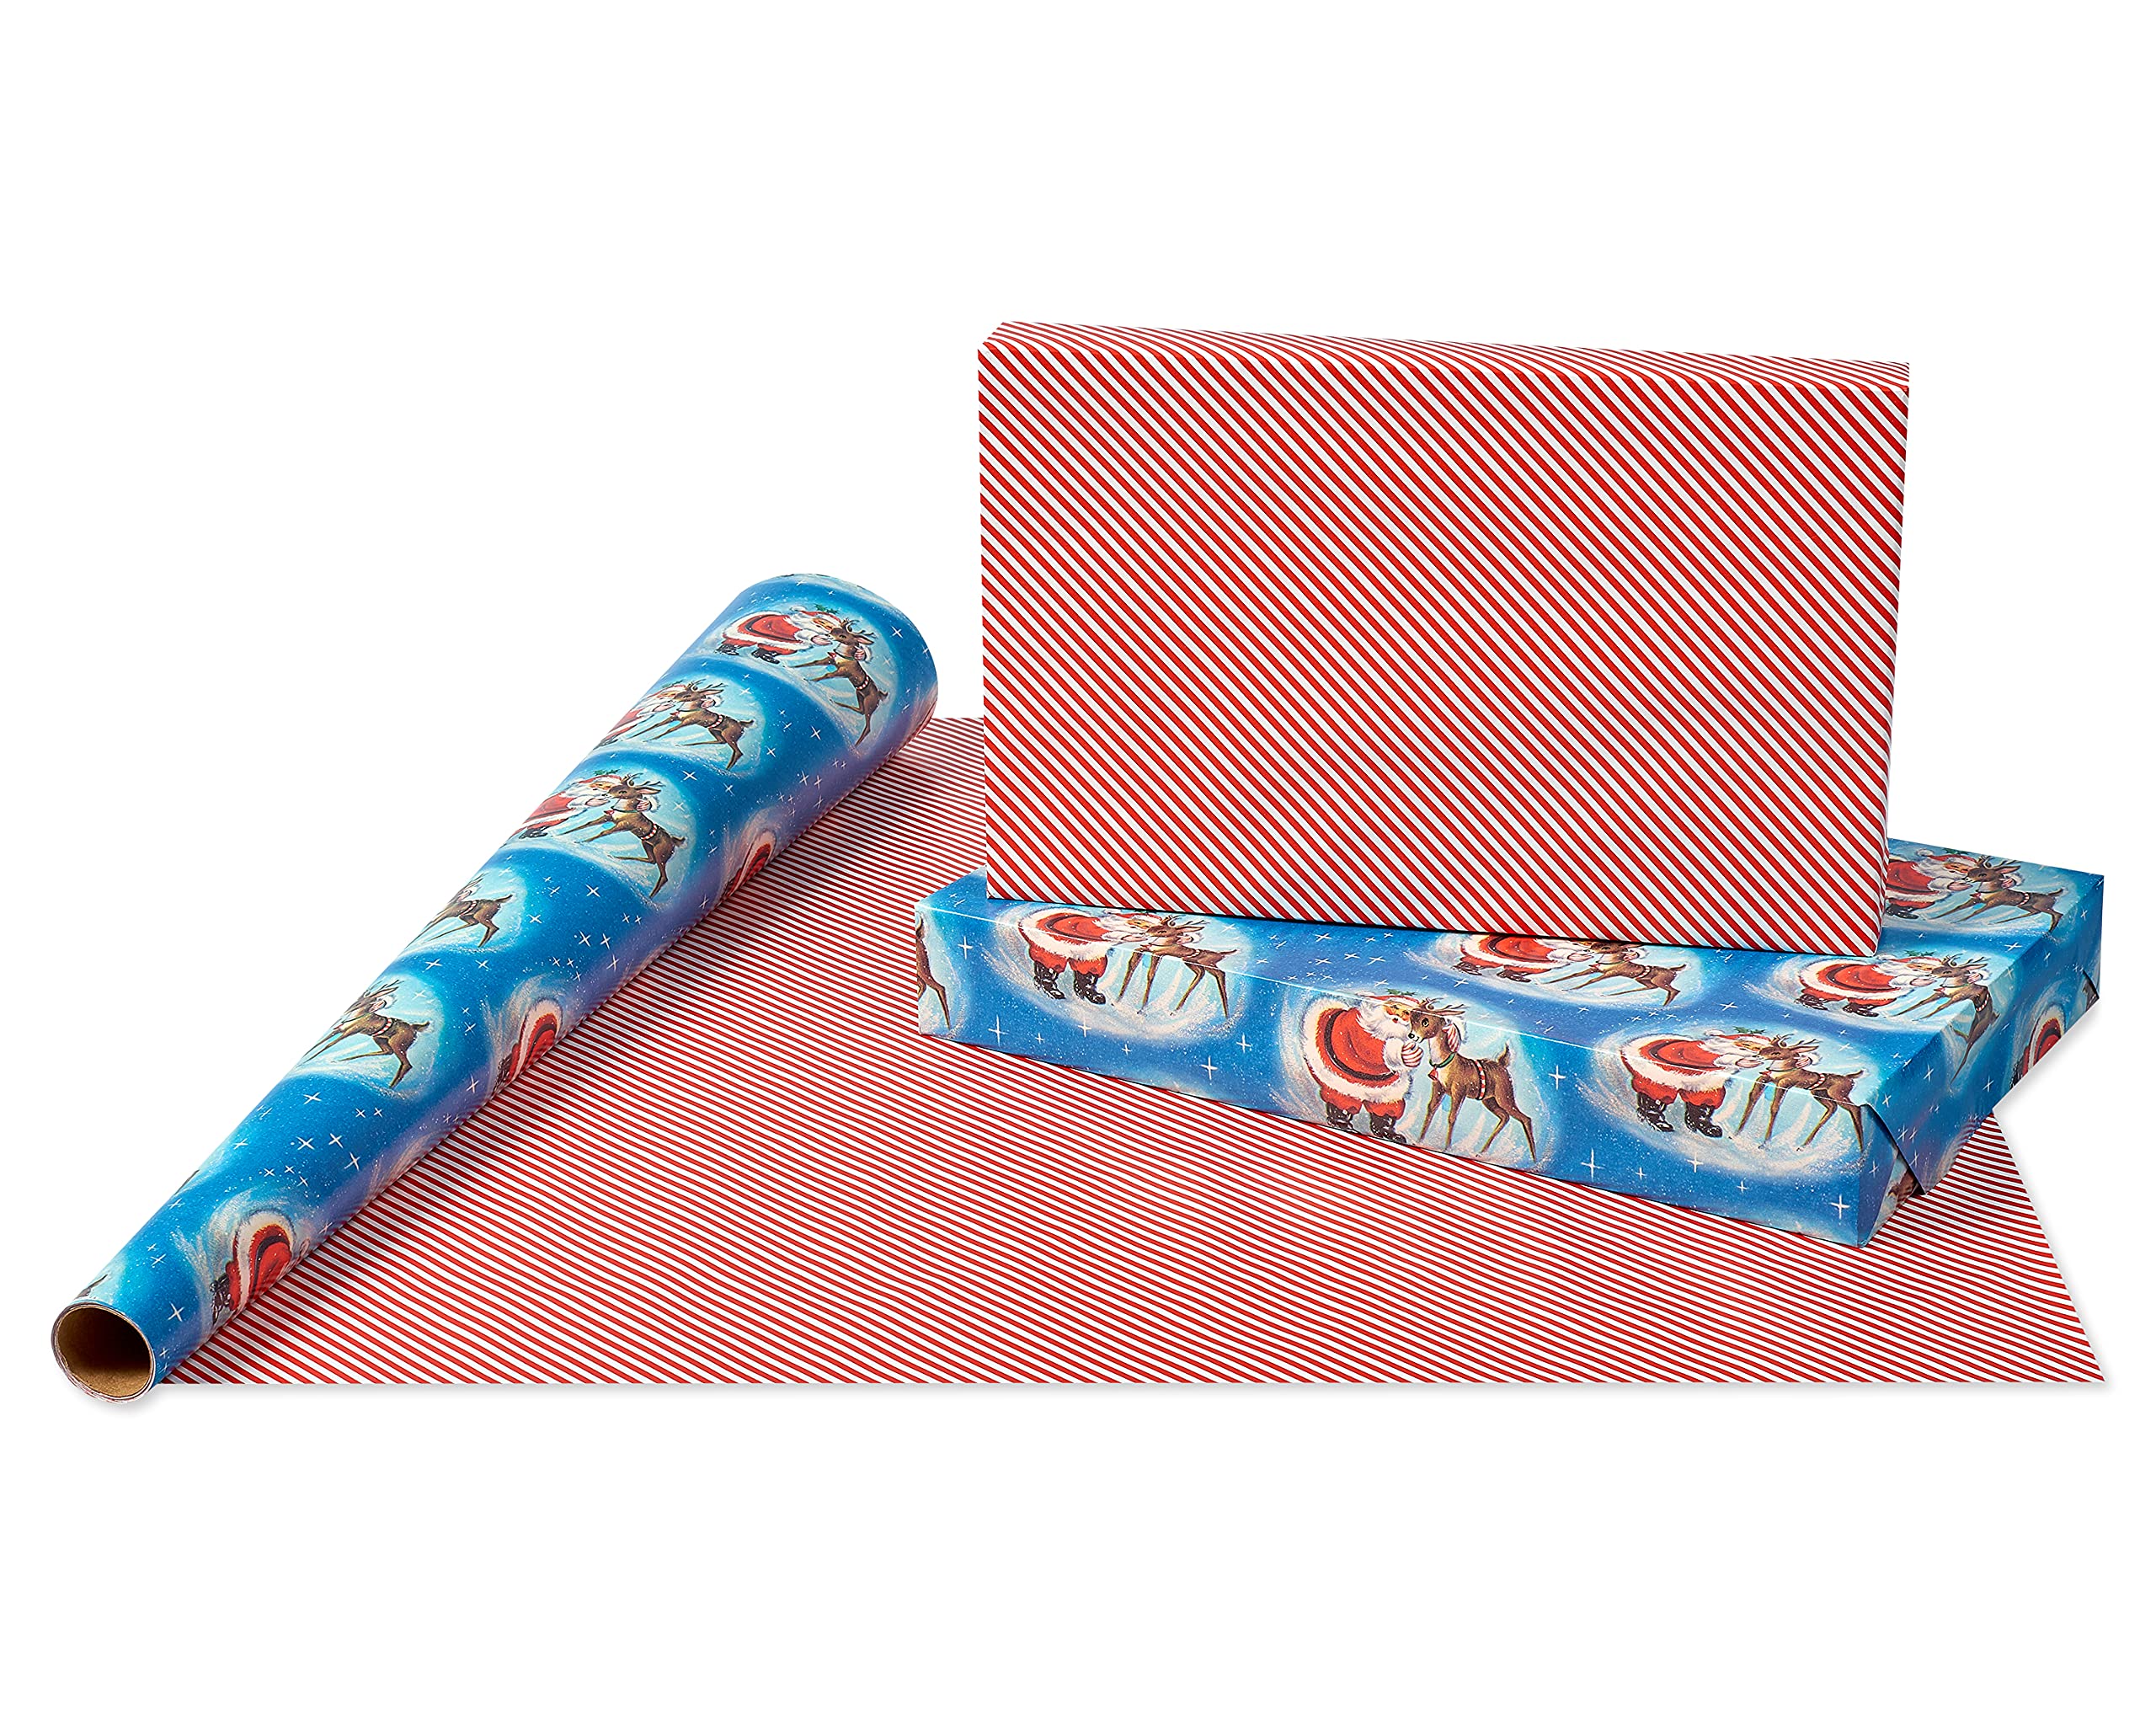 American Greetings 160 sq. ft. Reversible Christmas Wrapping Paper Set, Vintage Designs (4 Rolls 30 in. x 16 ft., 7 Bows, 30 Gift Tags)